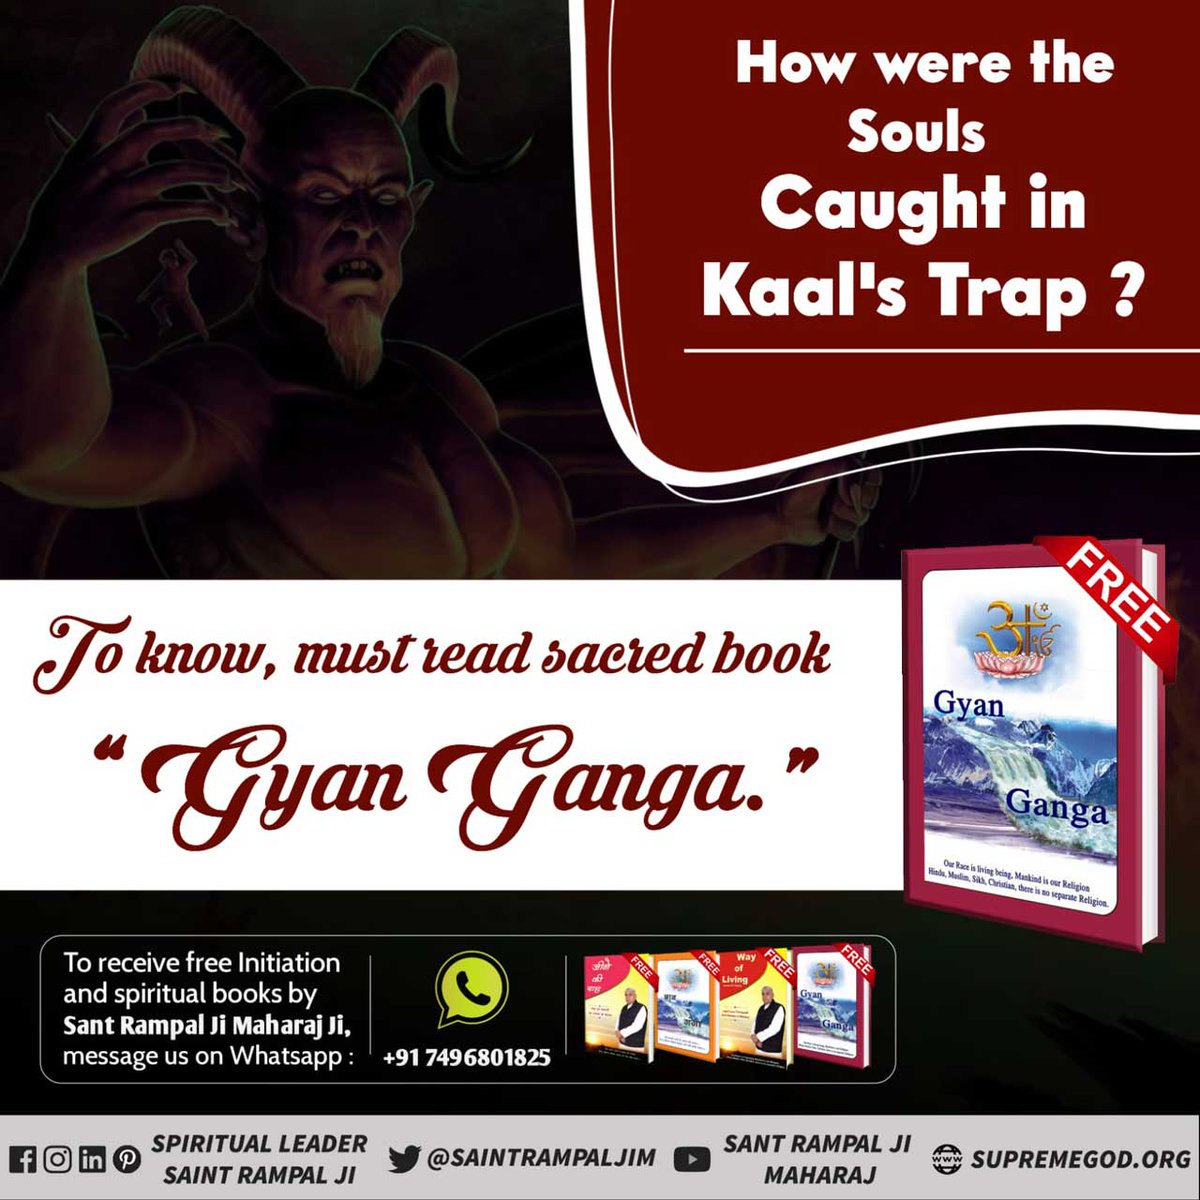 #GodMorningFriday
How were the Souls
Caught in Kaal's Trap?
To know more, must read the previous book 'Gyan Ganga''
Visit Saint Rampal Ji Maharaj YouTube Channel 
#fridaymorning